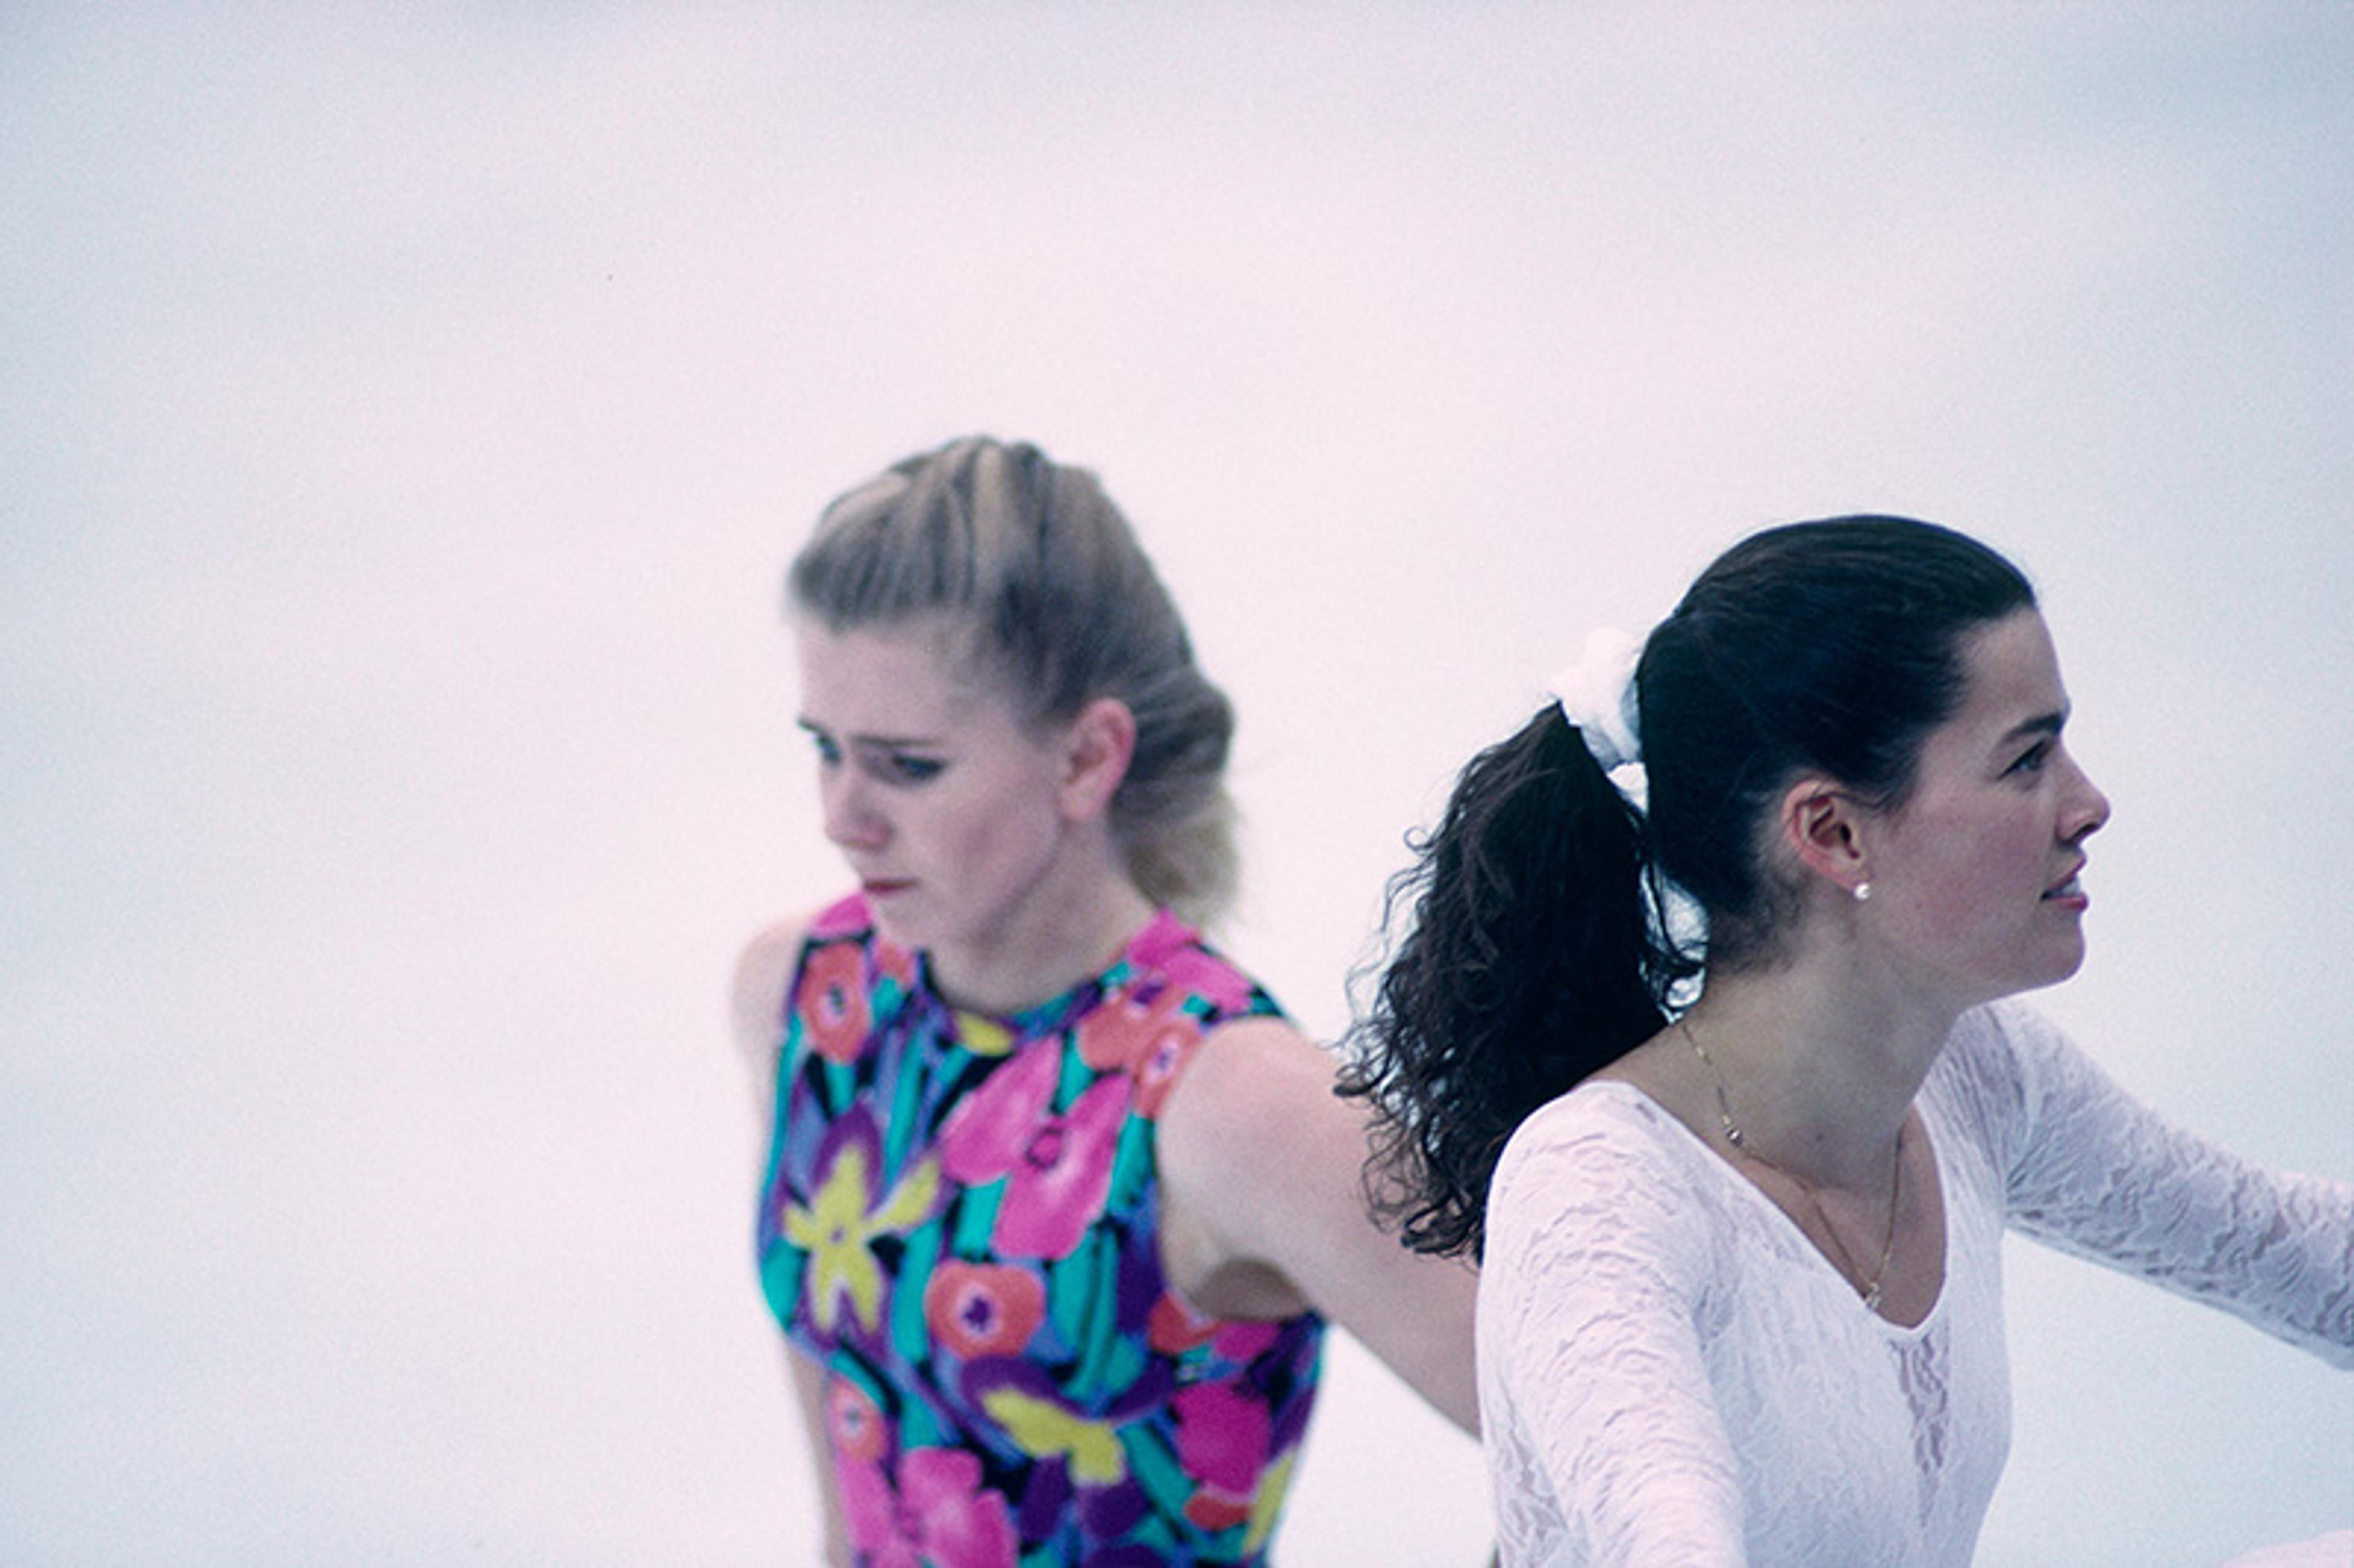 Two female ice skaters performing; one in a floral costume and the other in a white outfit, both concentrating on their routines on the ice rink.